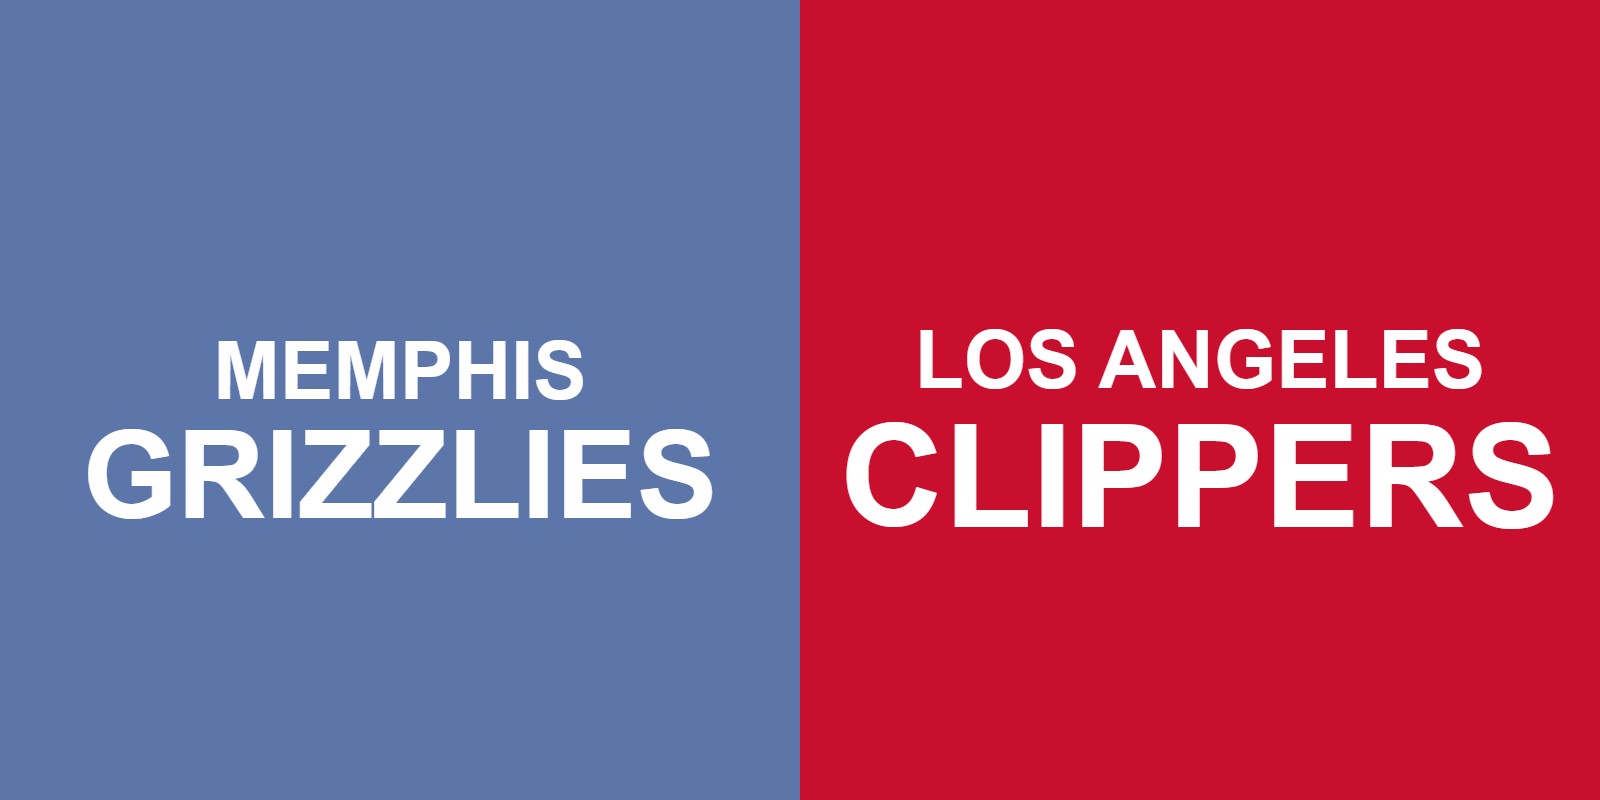 Grizzlies vs Clippers